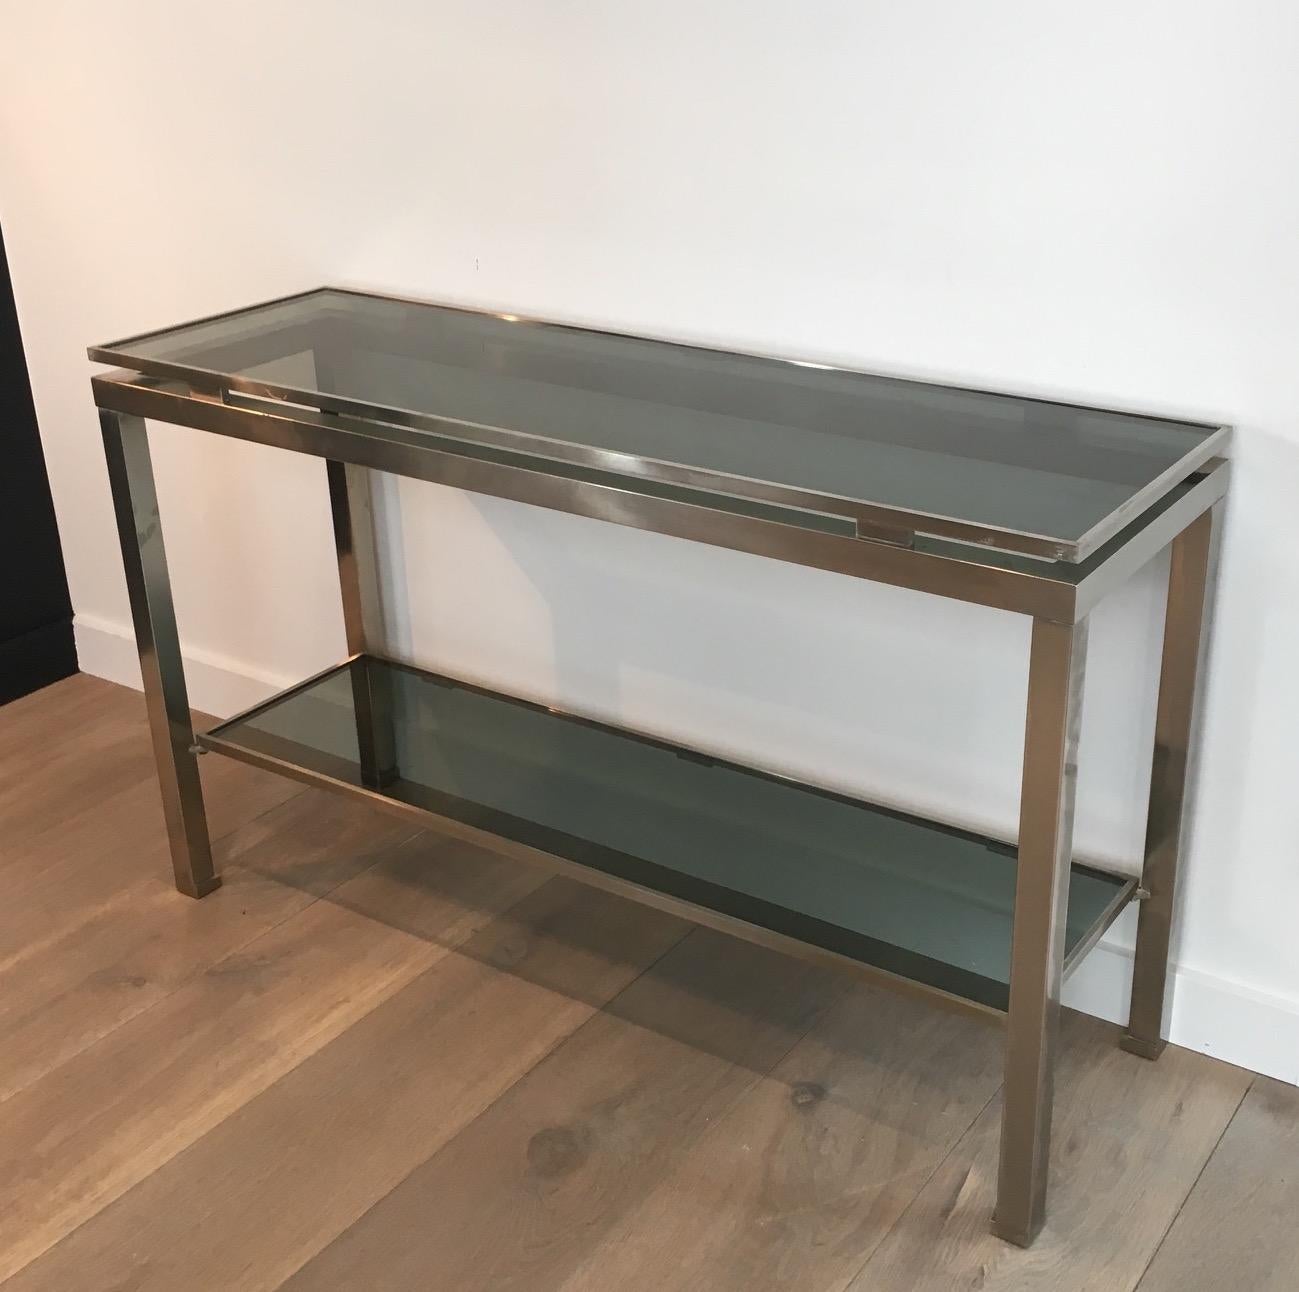 Mid-Century Modern Brushed Steel Console Table with Glass Tops, by Guy Lefèvre for Maison Jansen For Sale